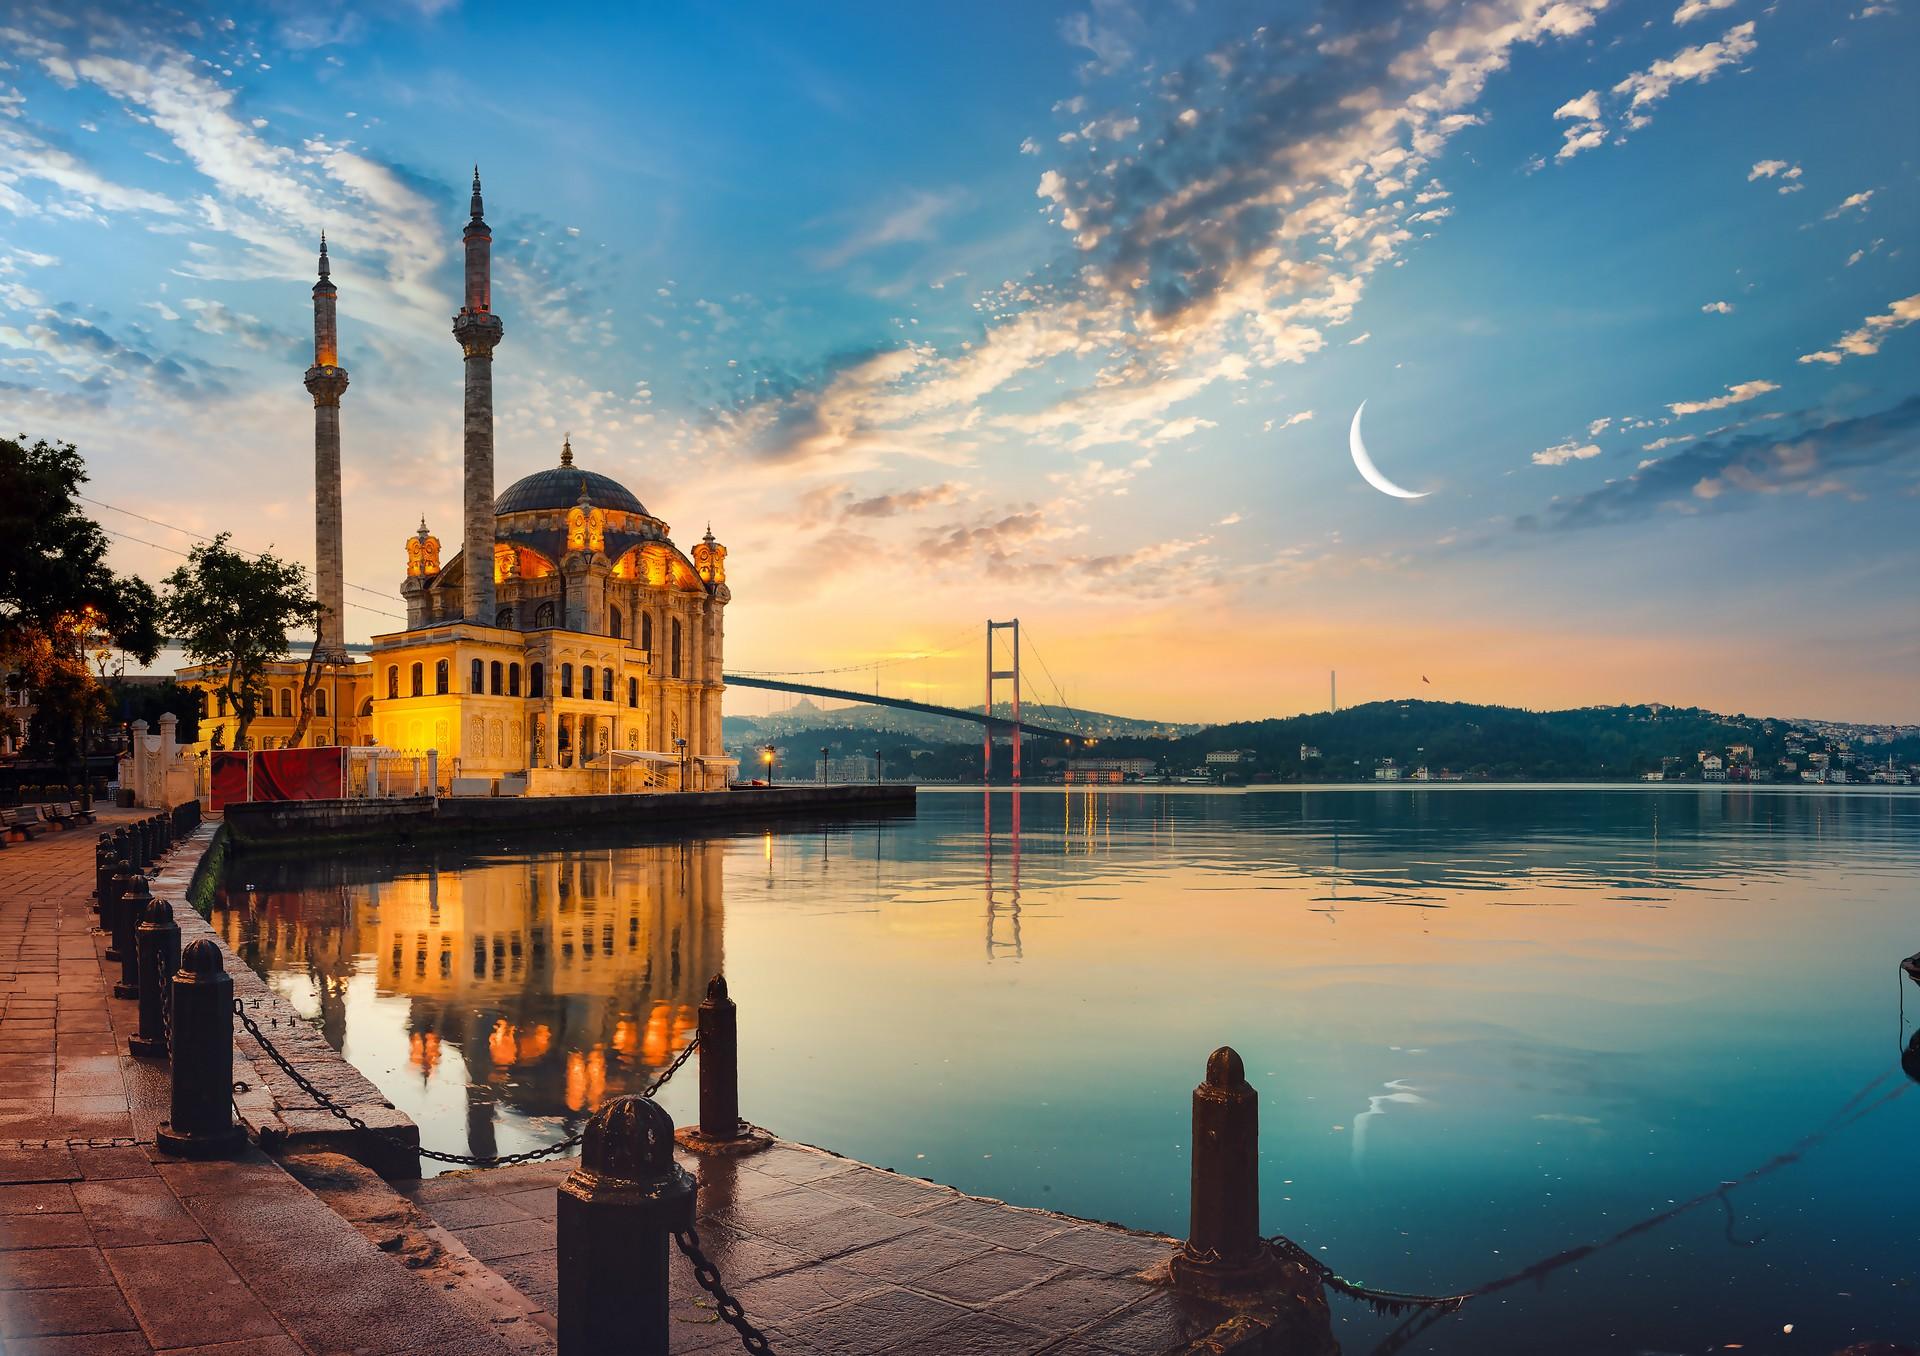 Architecture in Istanbul at dawn